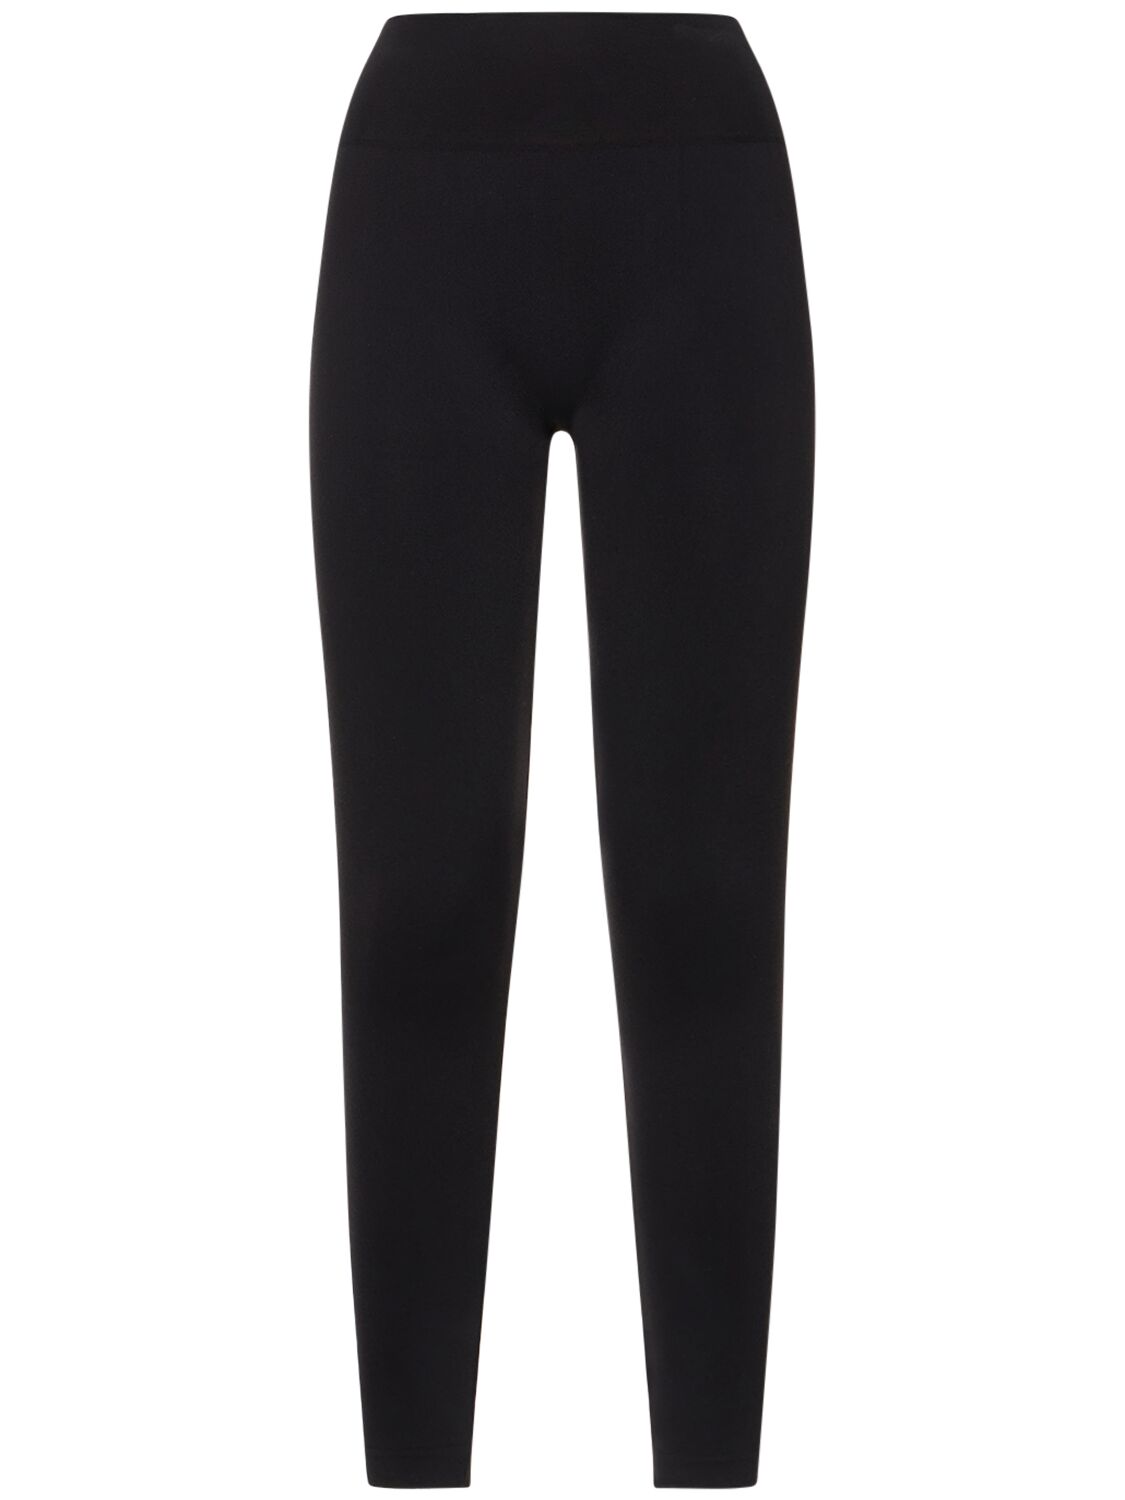 Image of Perfect Fit Stretch Tech Leggings